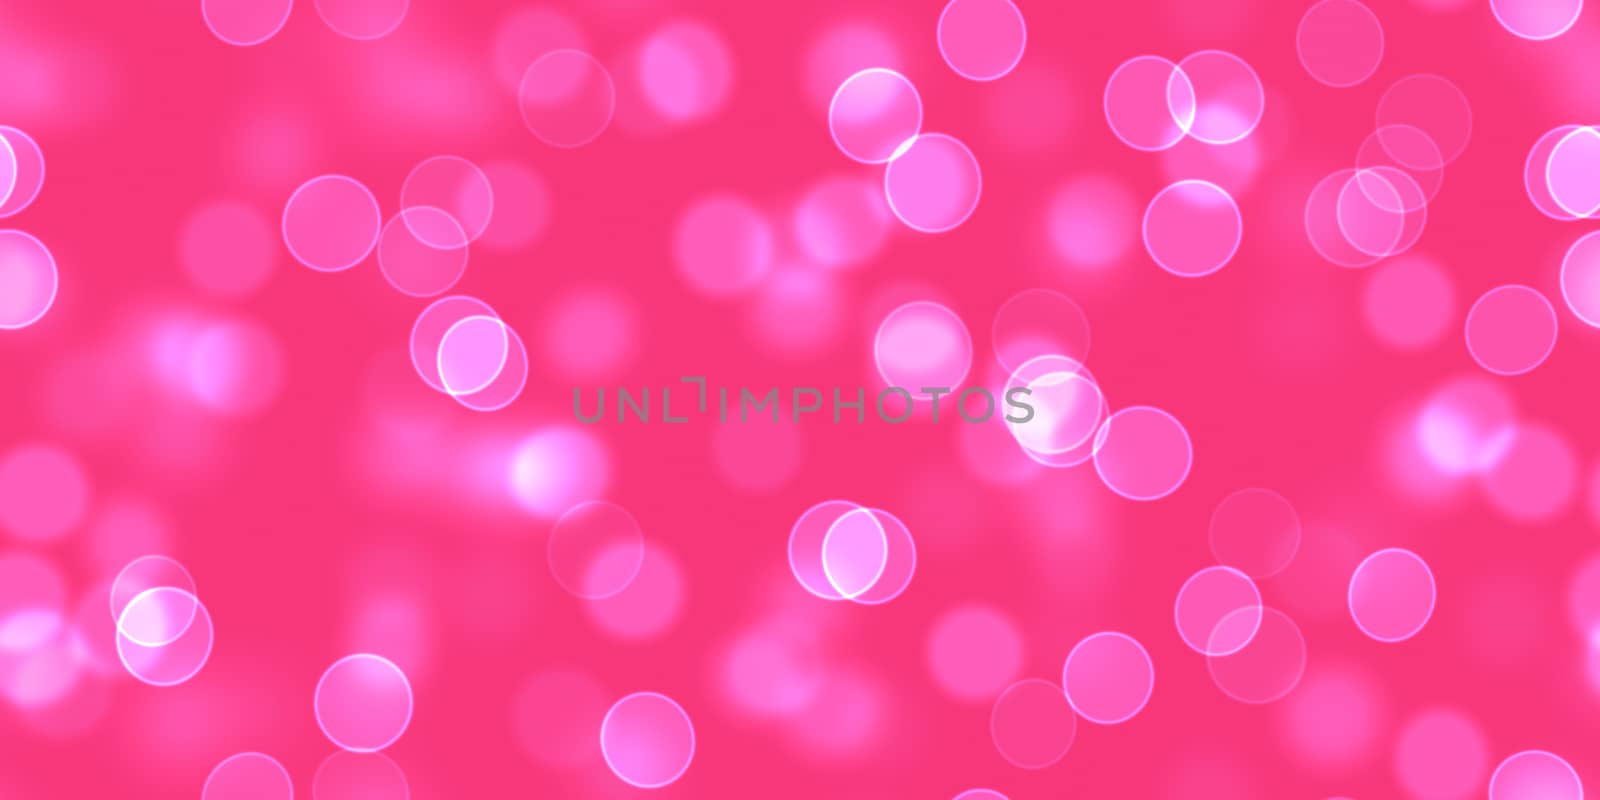 Pink Bright Bokeh Background. Glowing Lights Texture. Shine Celebration Backdrop. by sanches812